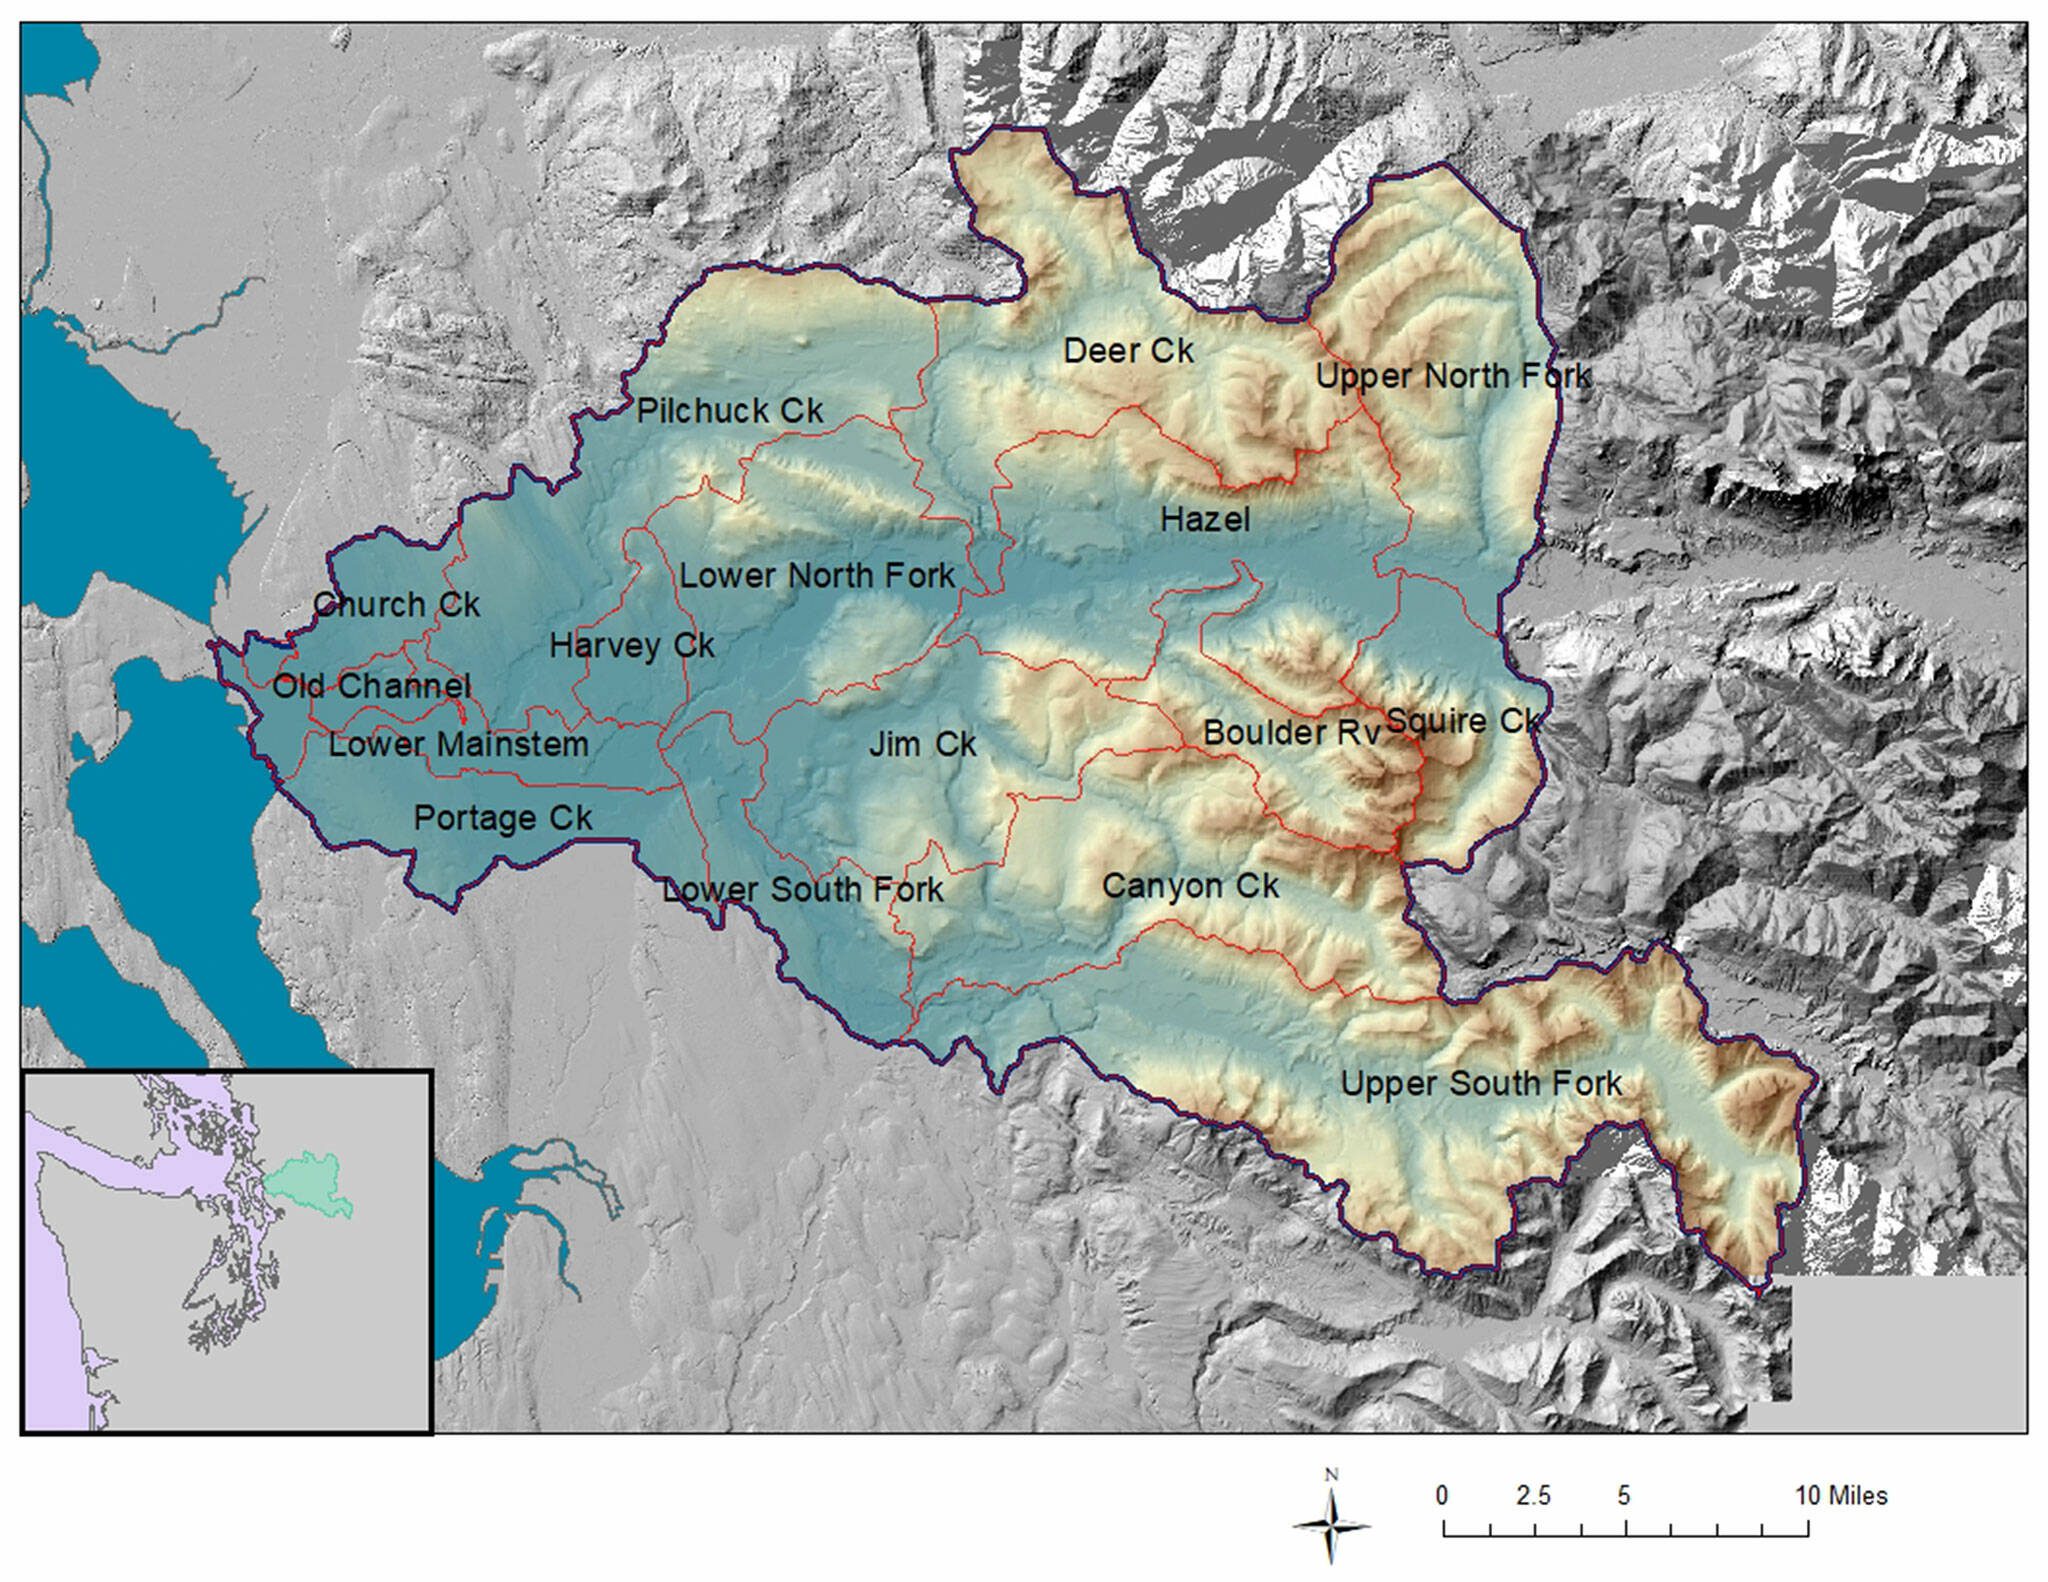 A graphic from the “Stillaguamish Water Quality Trend Report” (2018) published by the Stillaguamish Tribe of Indians maps the Stillaguamish River’s watershed and sub-basins.